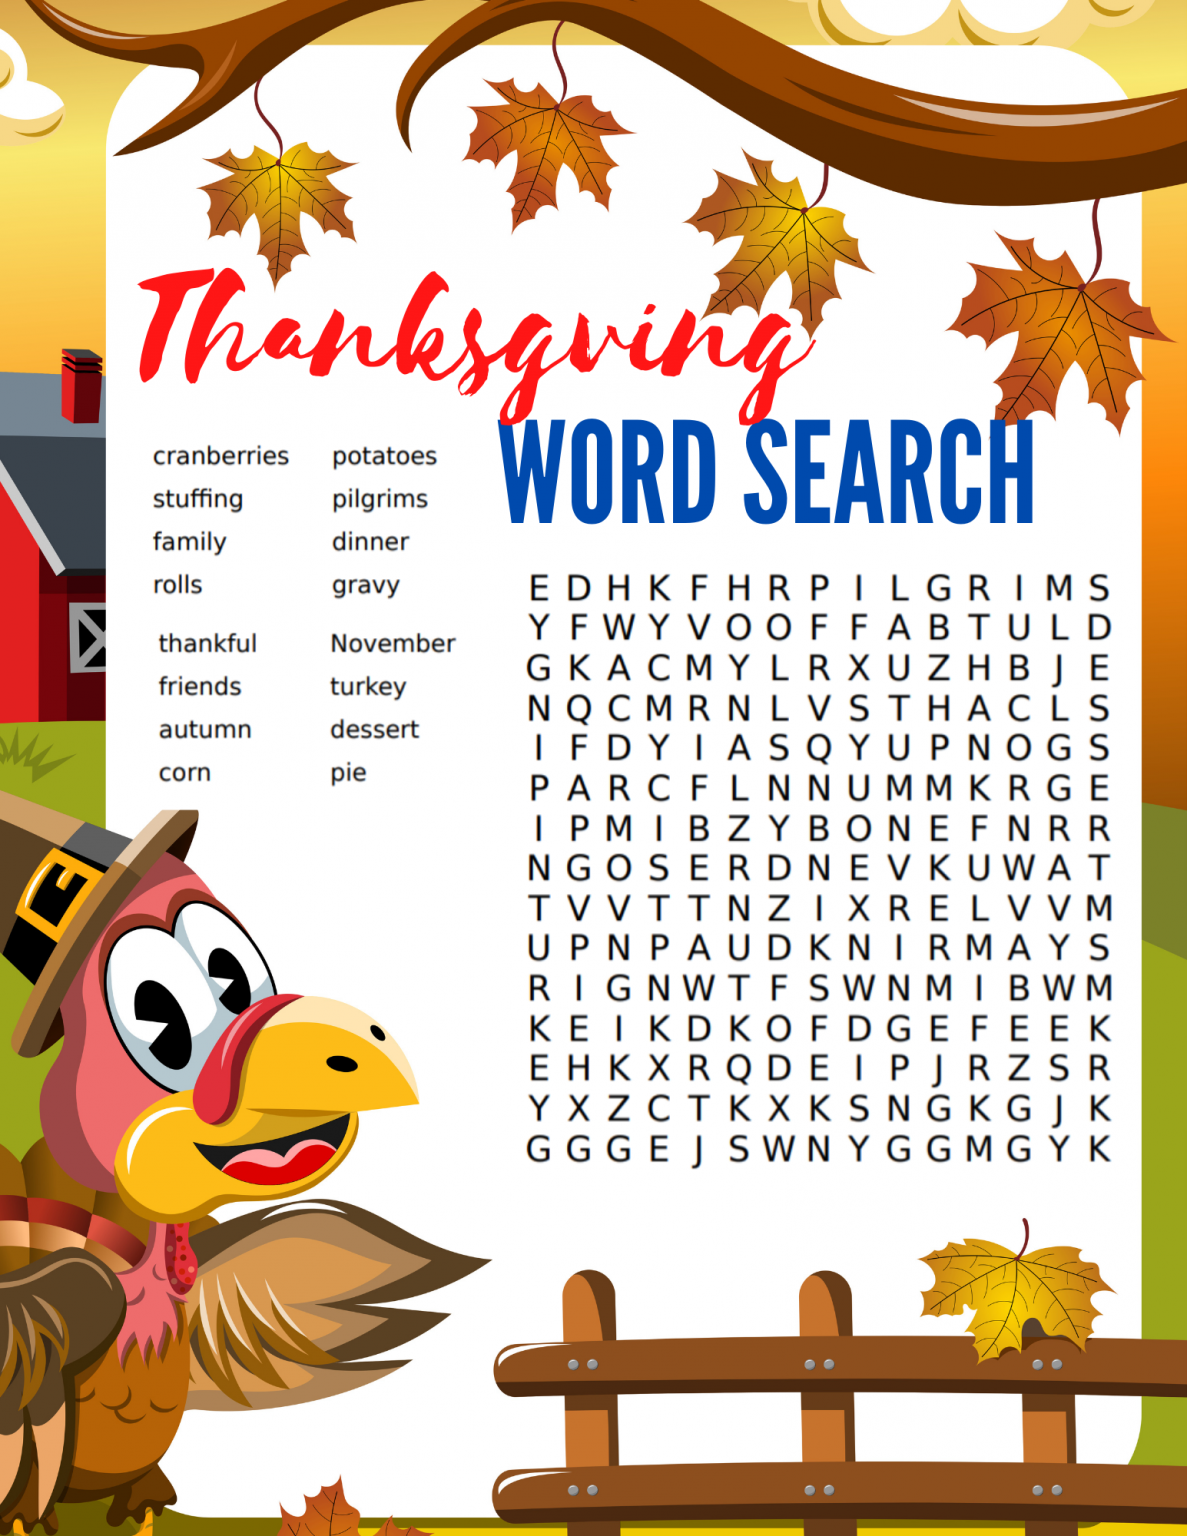 here-s-a-word-search-puzzle-in-celebration-of-thanksgiving-click-on